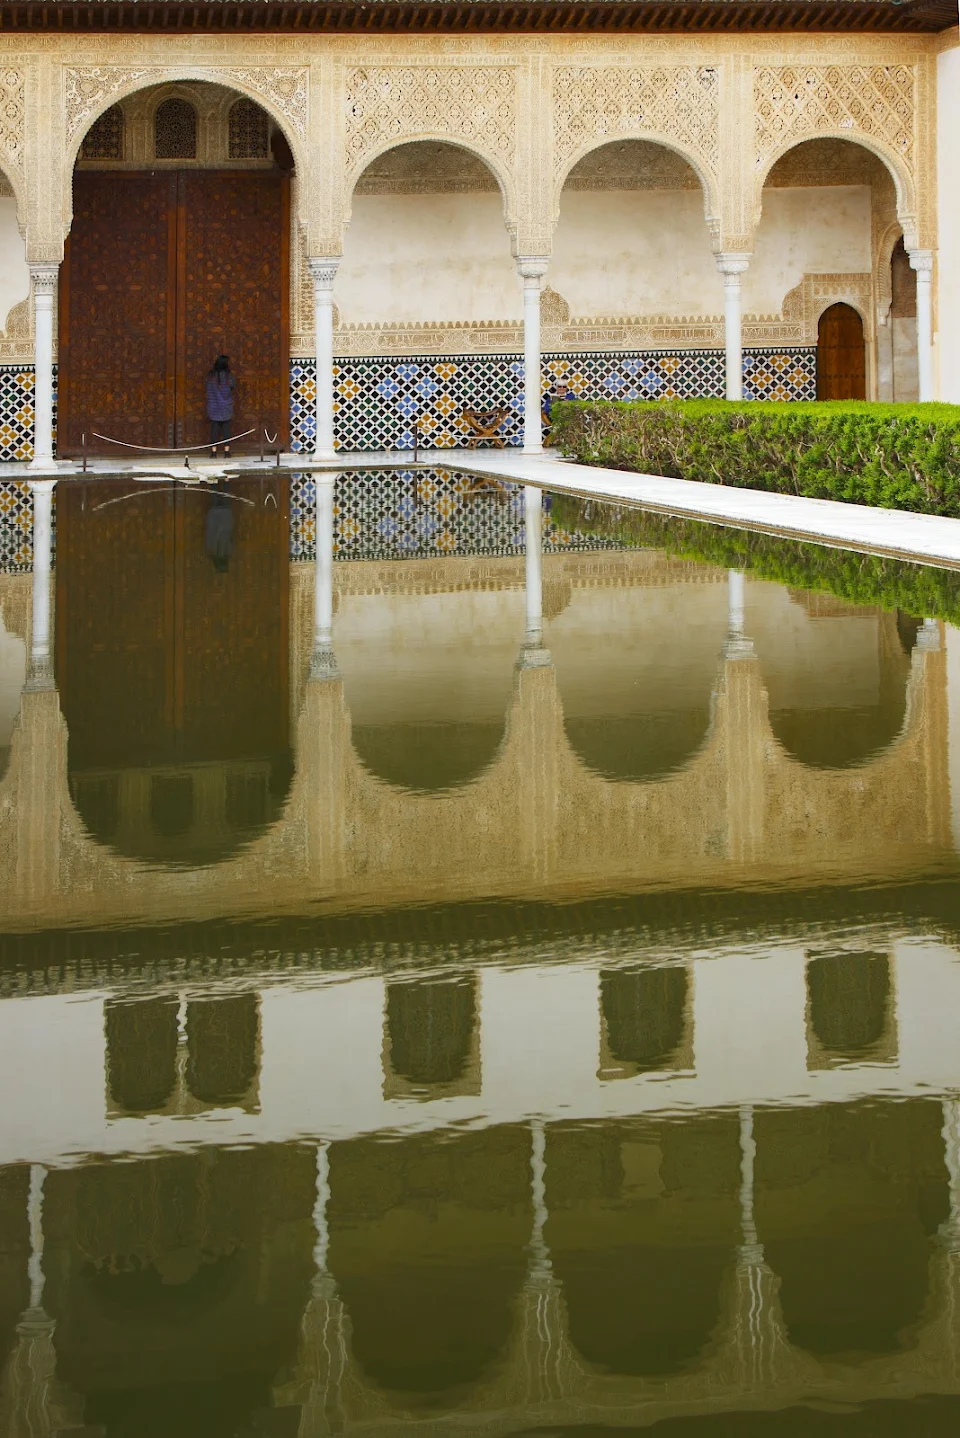 Mirror pool... (Nasrid Palaces, the Alhambra - in Granada, Spain)